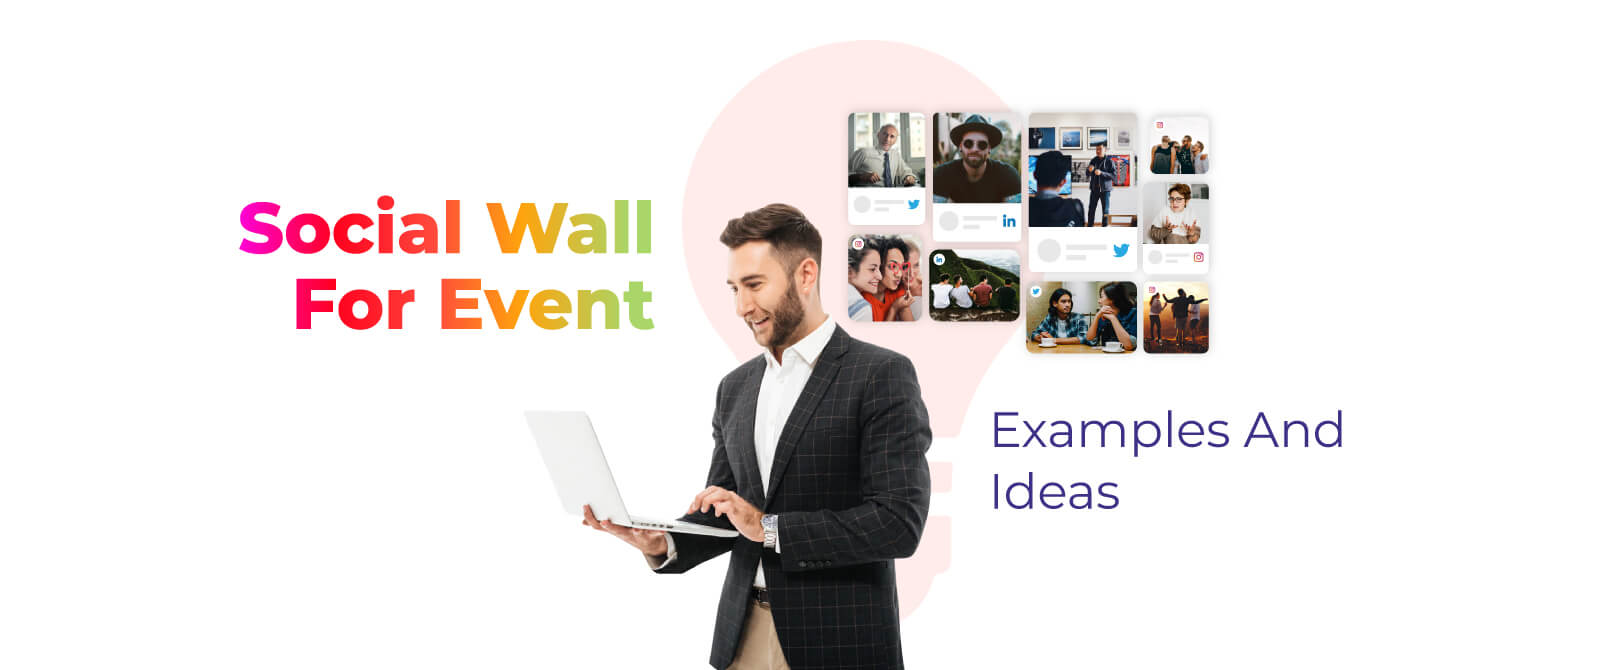 Social Wall For Event: Examples And Ideas